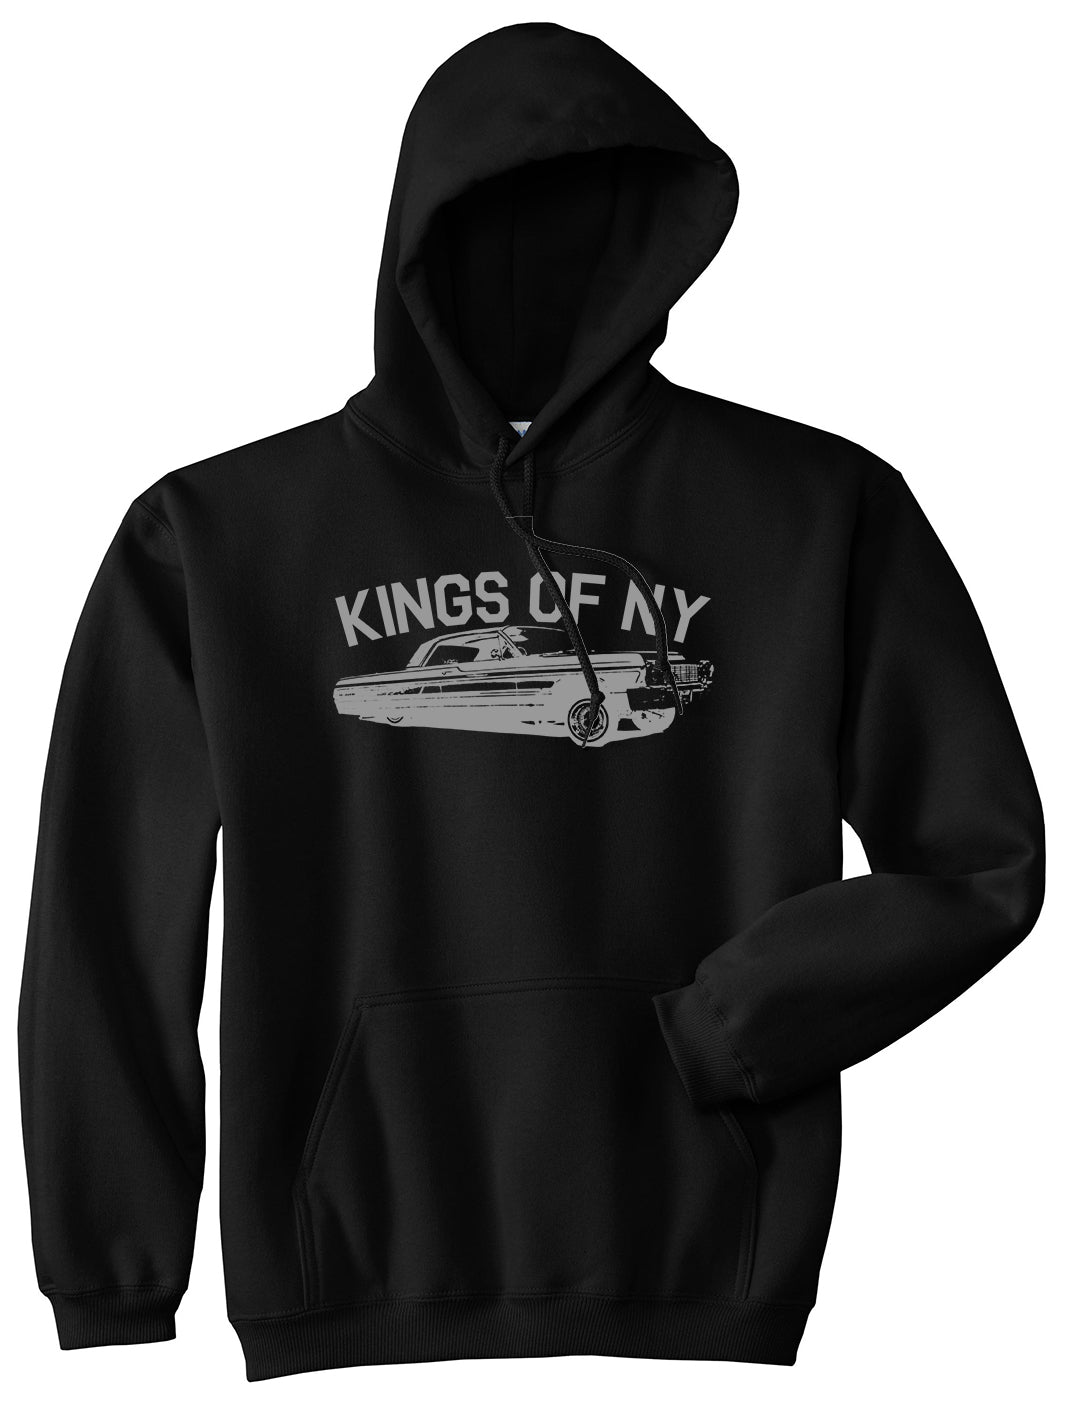 Kings Of NY Lowrider Mens Pullover Hoodie Black by Kings Of NY